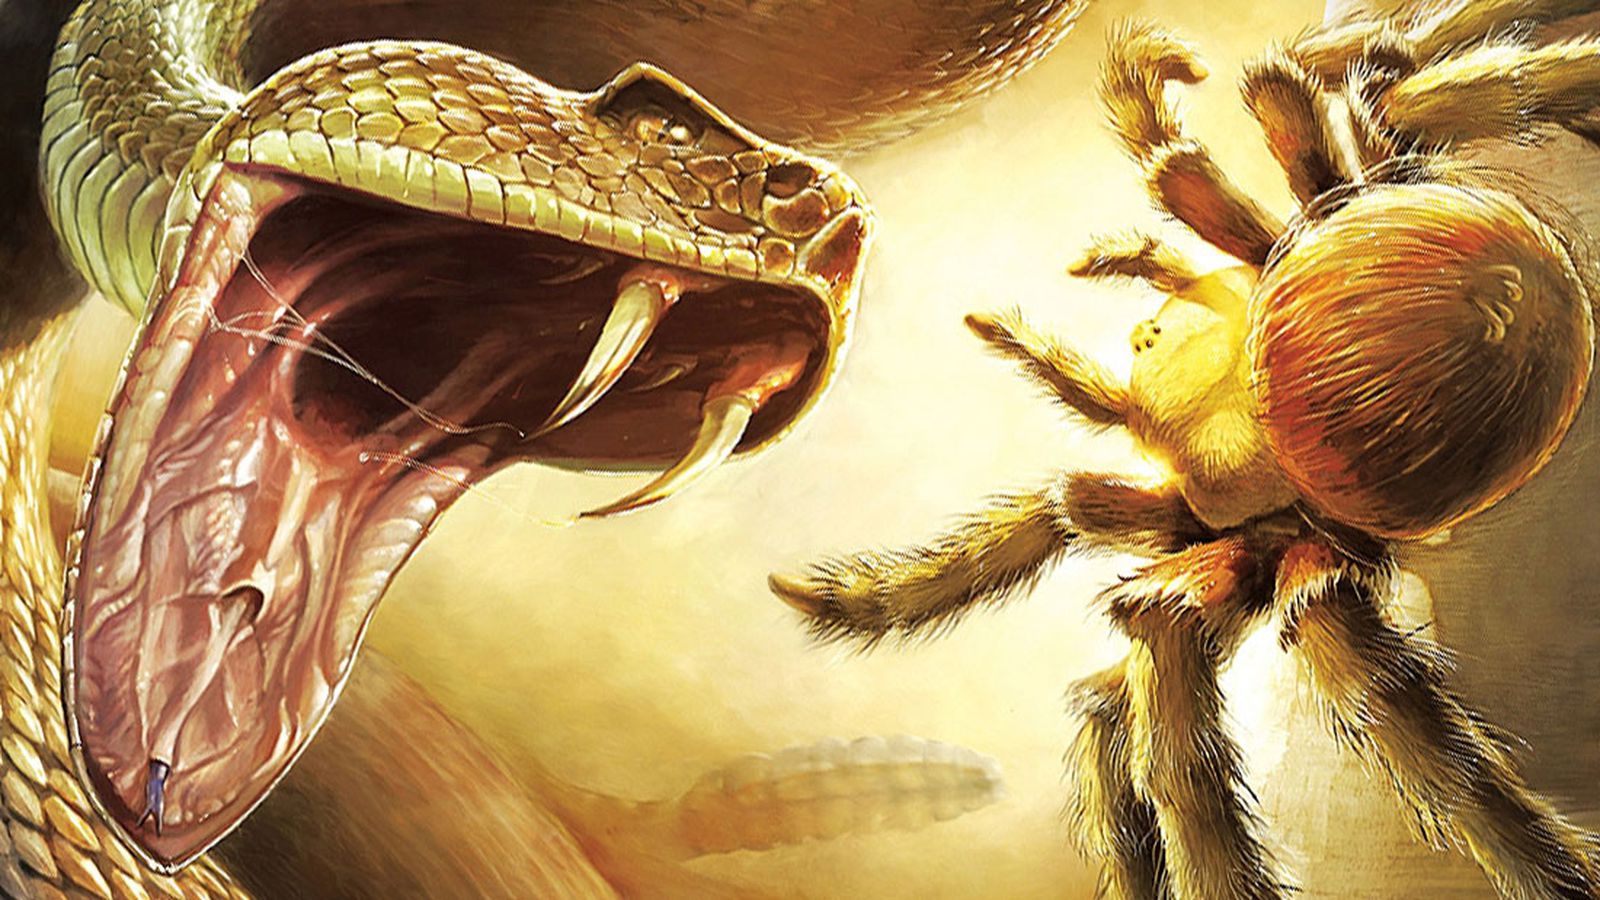 Nordic Games’ plans for THQ titles in early stages, Deadly Creatures high on the list